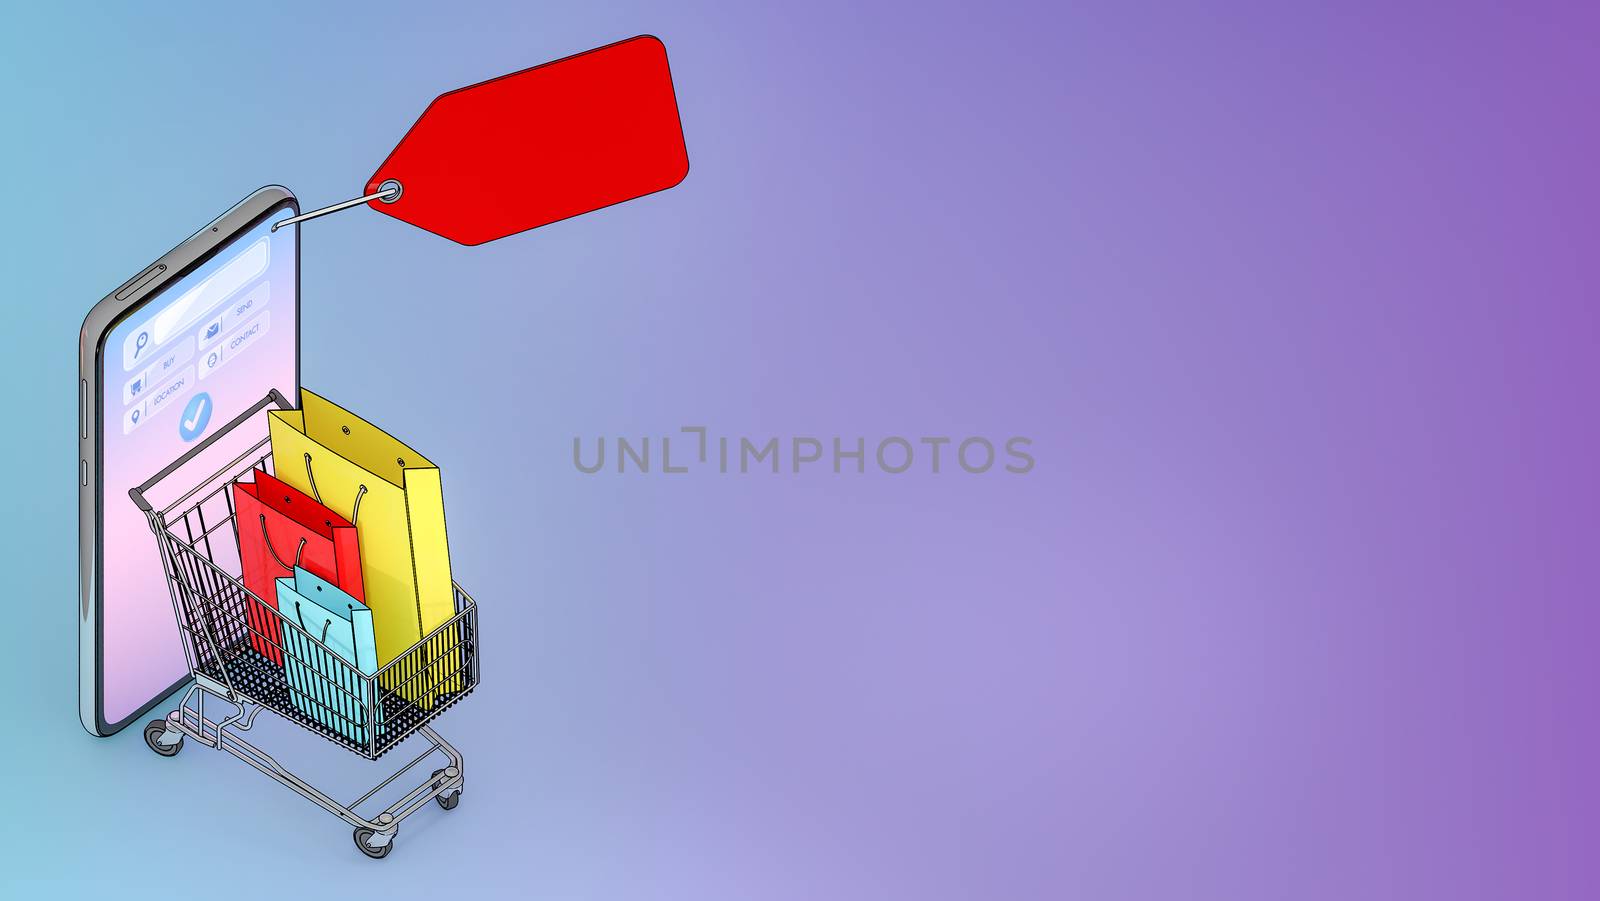 Many Shopping bag and price tag and credit card in a shopping cart appeared from smartphones screen., shopping online or shopaholic concept, 3D rendering.